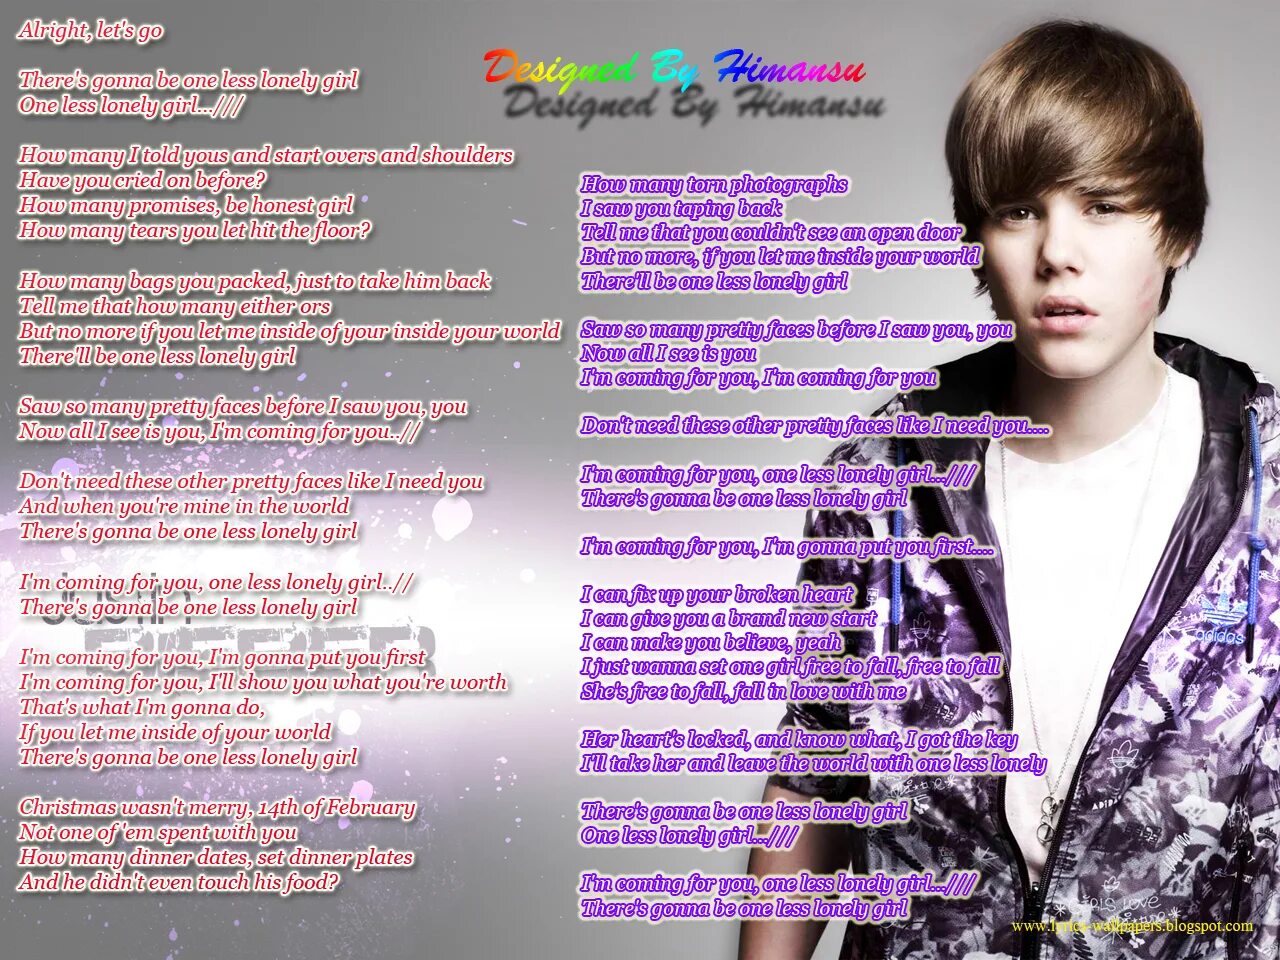 Little girls текст. Джастин Бибер Lonely. Lonely Justin Bieber текст. Джастин Бибер one less Lonely girl. Фаворит гёрл Дастин бмбер.